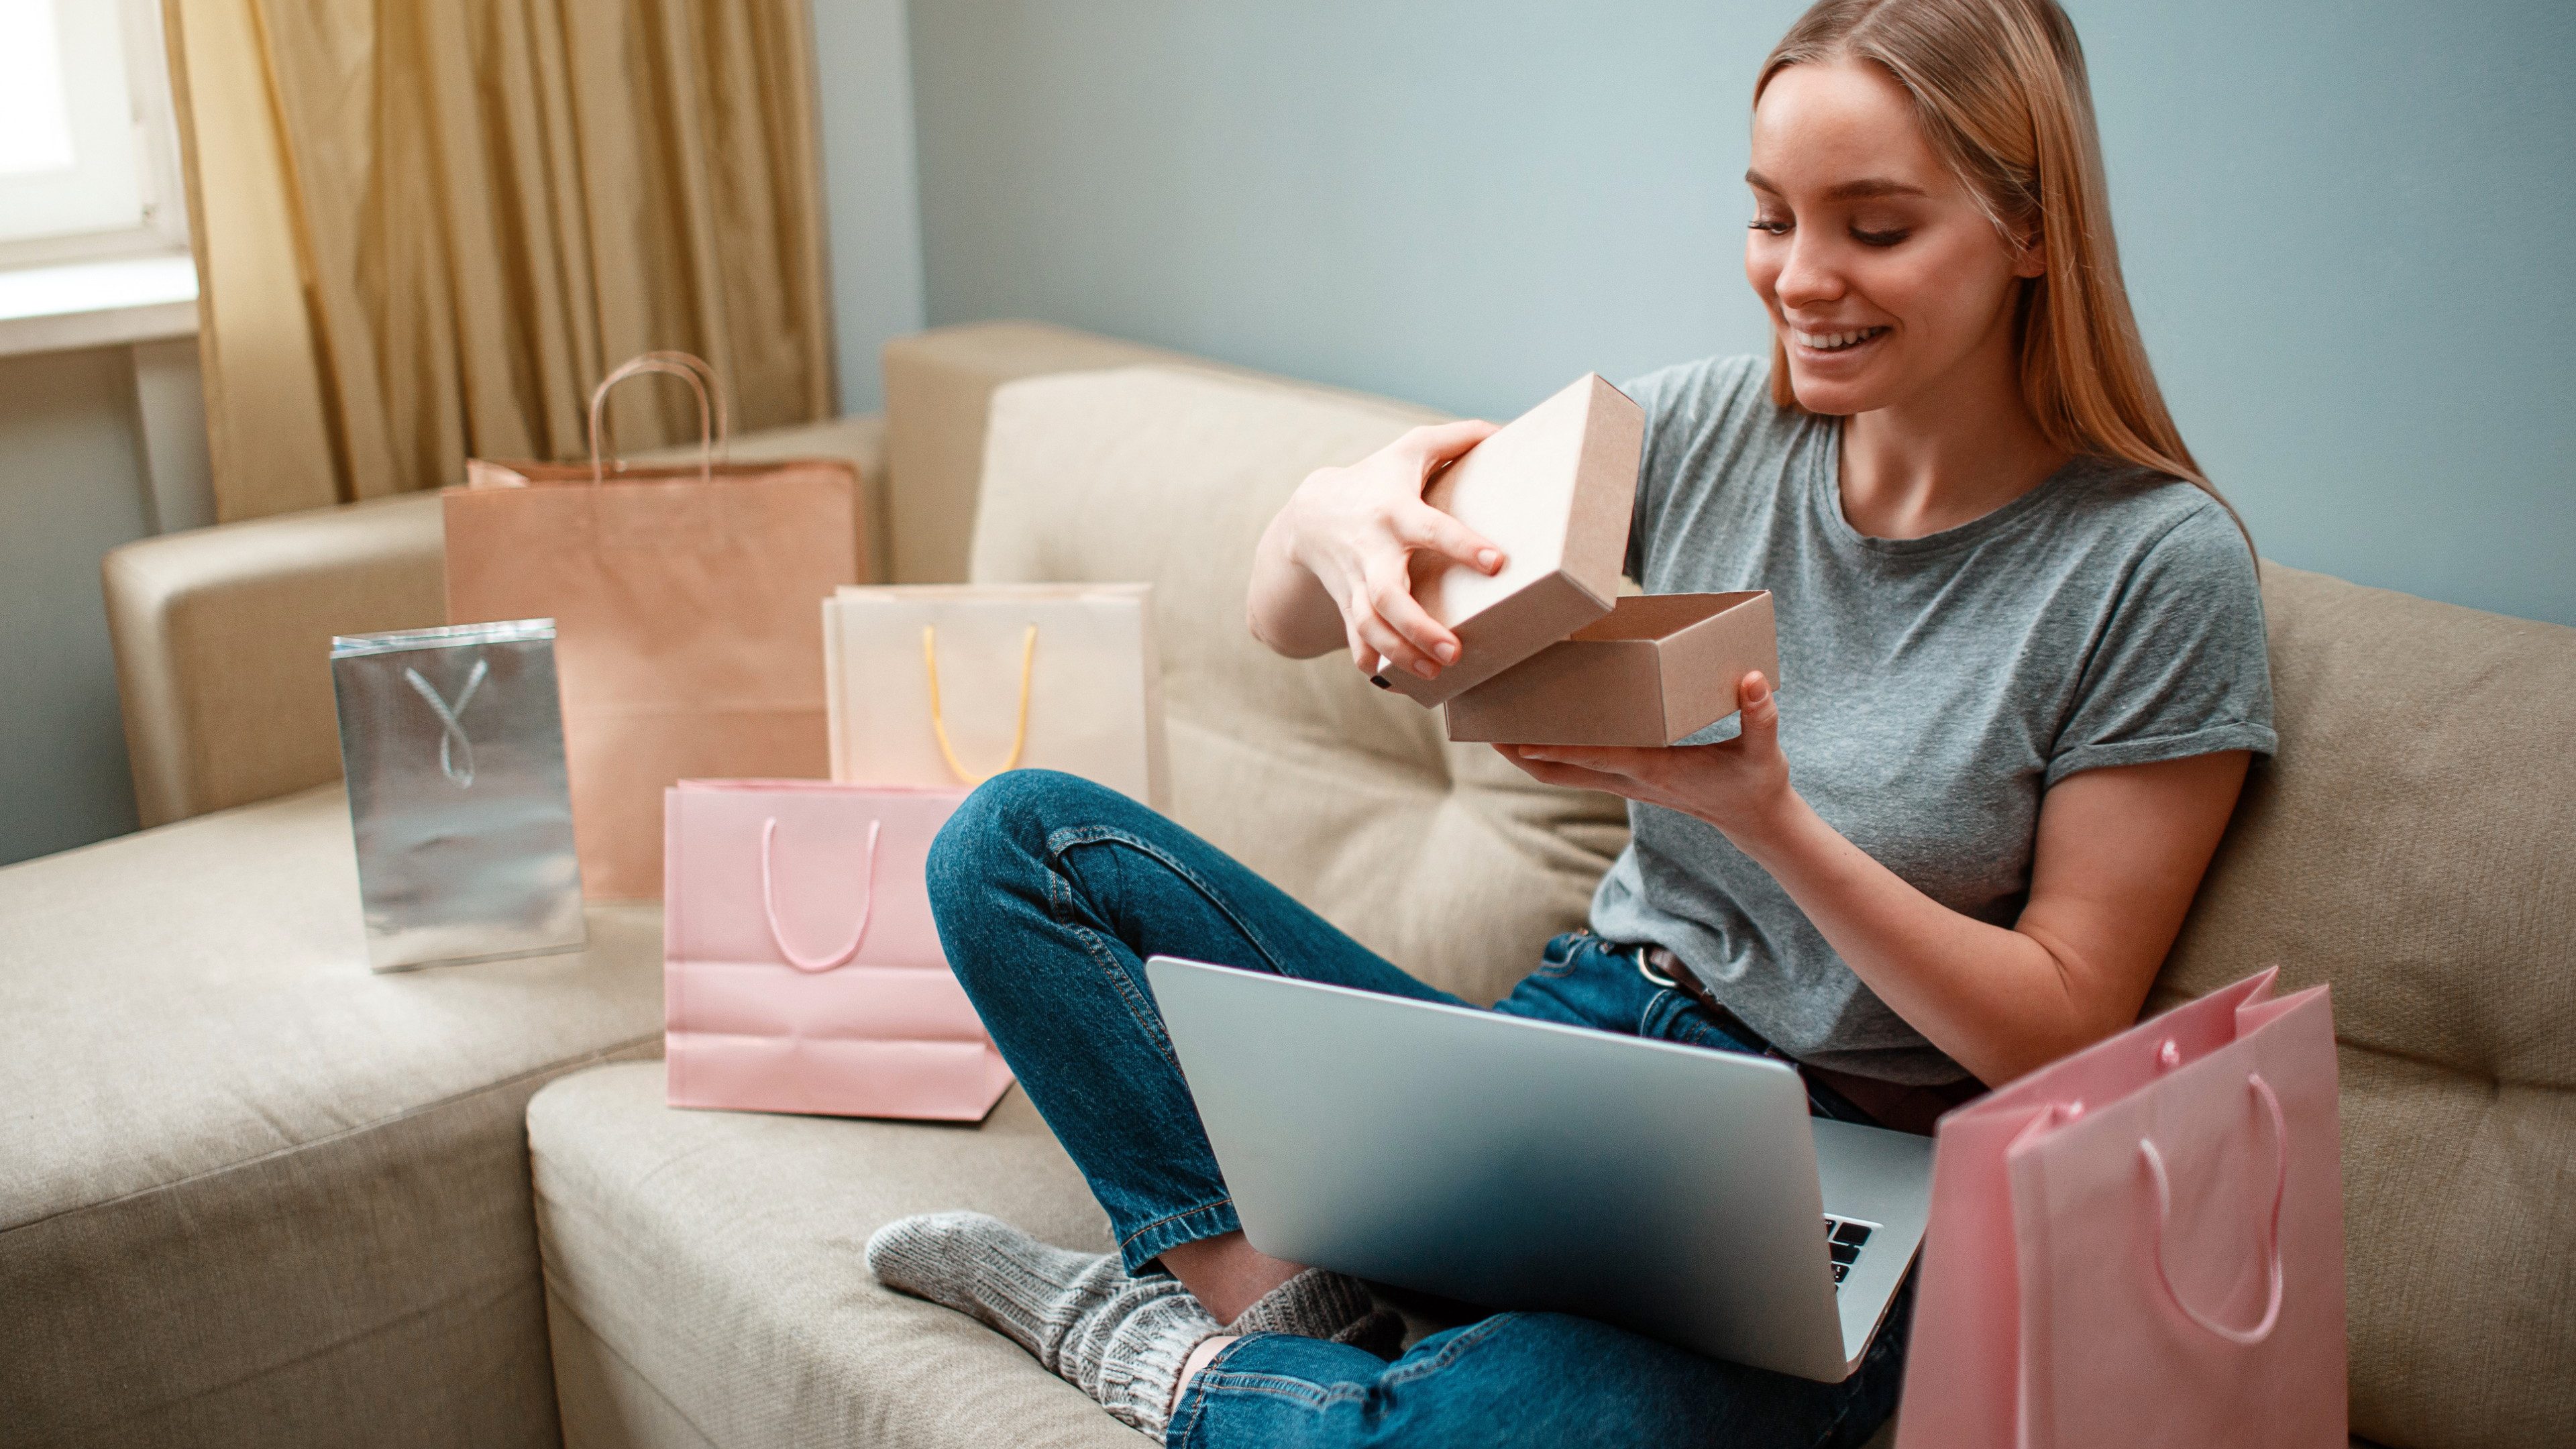 Online shopping at home. Young smiling shopper is unboxing her new parcel and looking into, ordered and delivered by internet